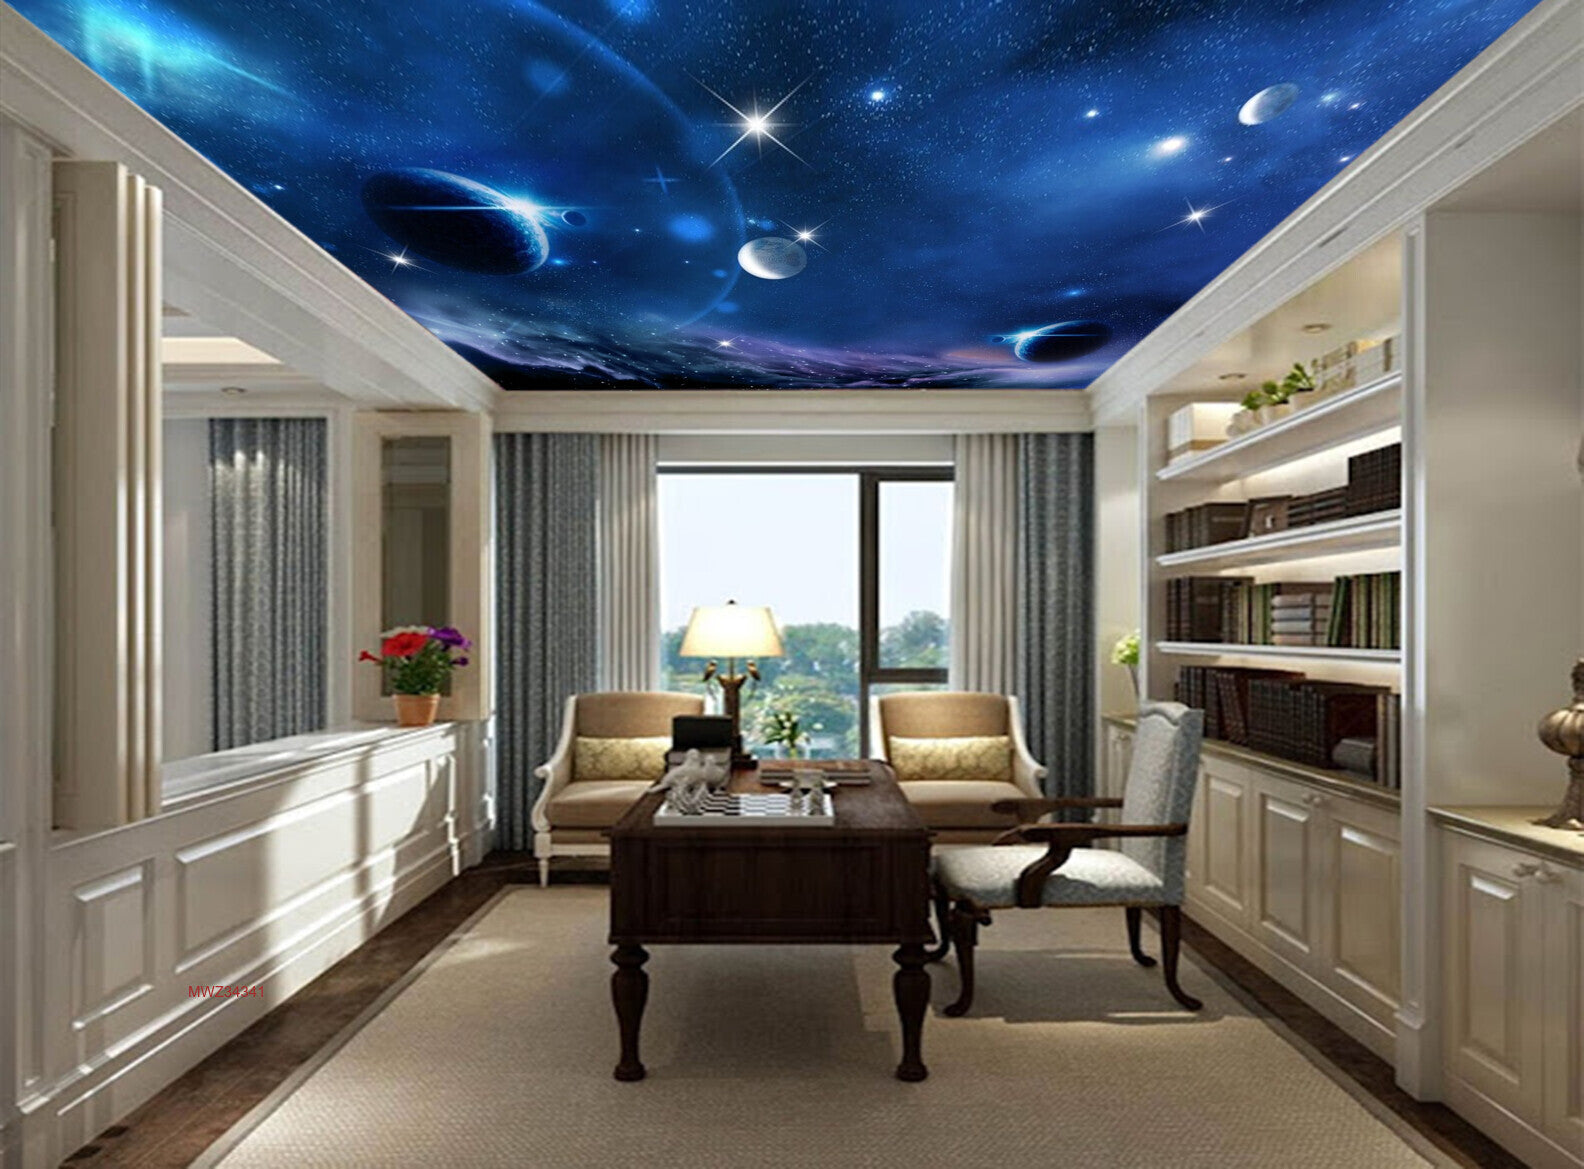 Avikalp MWZ3434 Space Moon Planets Stars HD Wallpaper for Ceiling